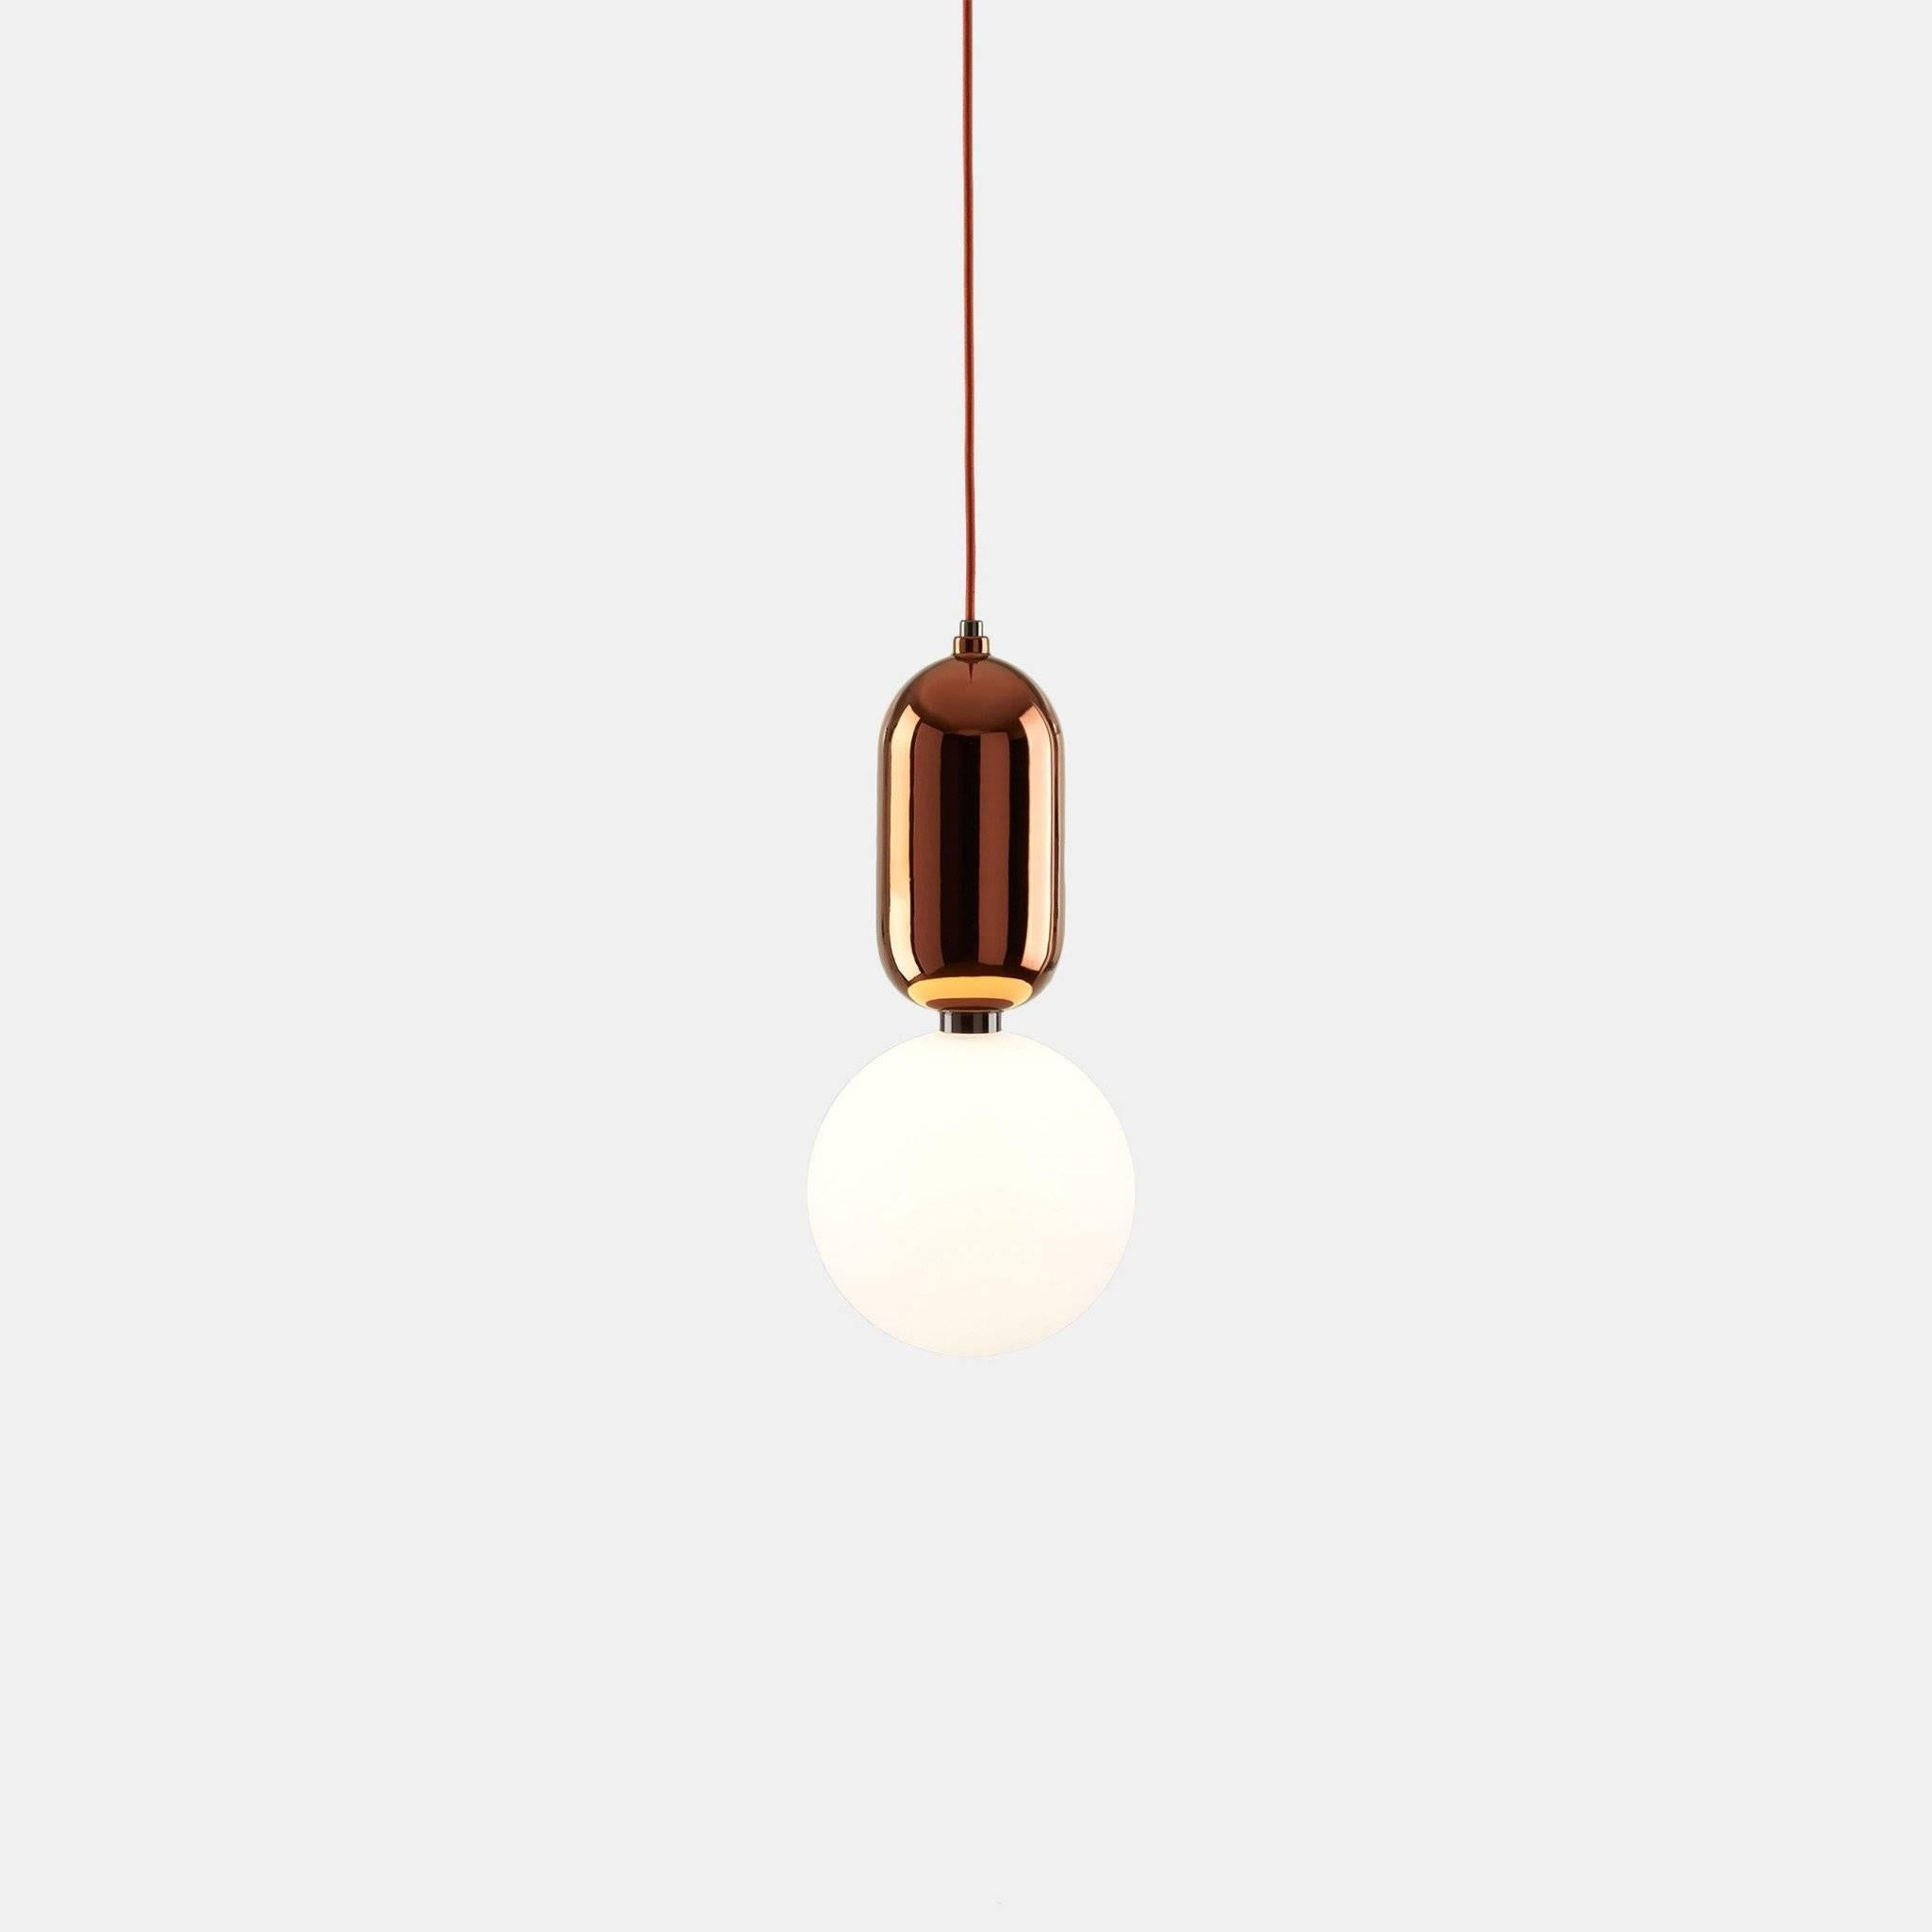 Suspension lamp with a painted ceramic base in gold, platinum or copper finish and a diffuser in blown opal matte glass. 

Available in the following finishes: 
White, black, platinum, gold or copper

Designed by Jaime